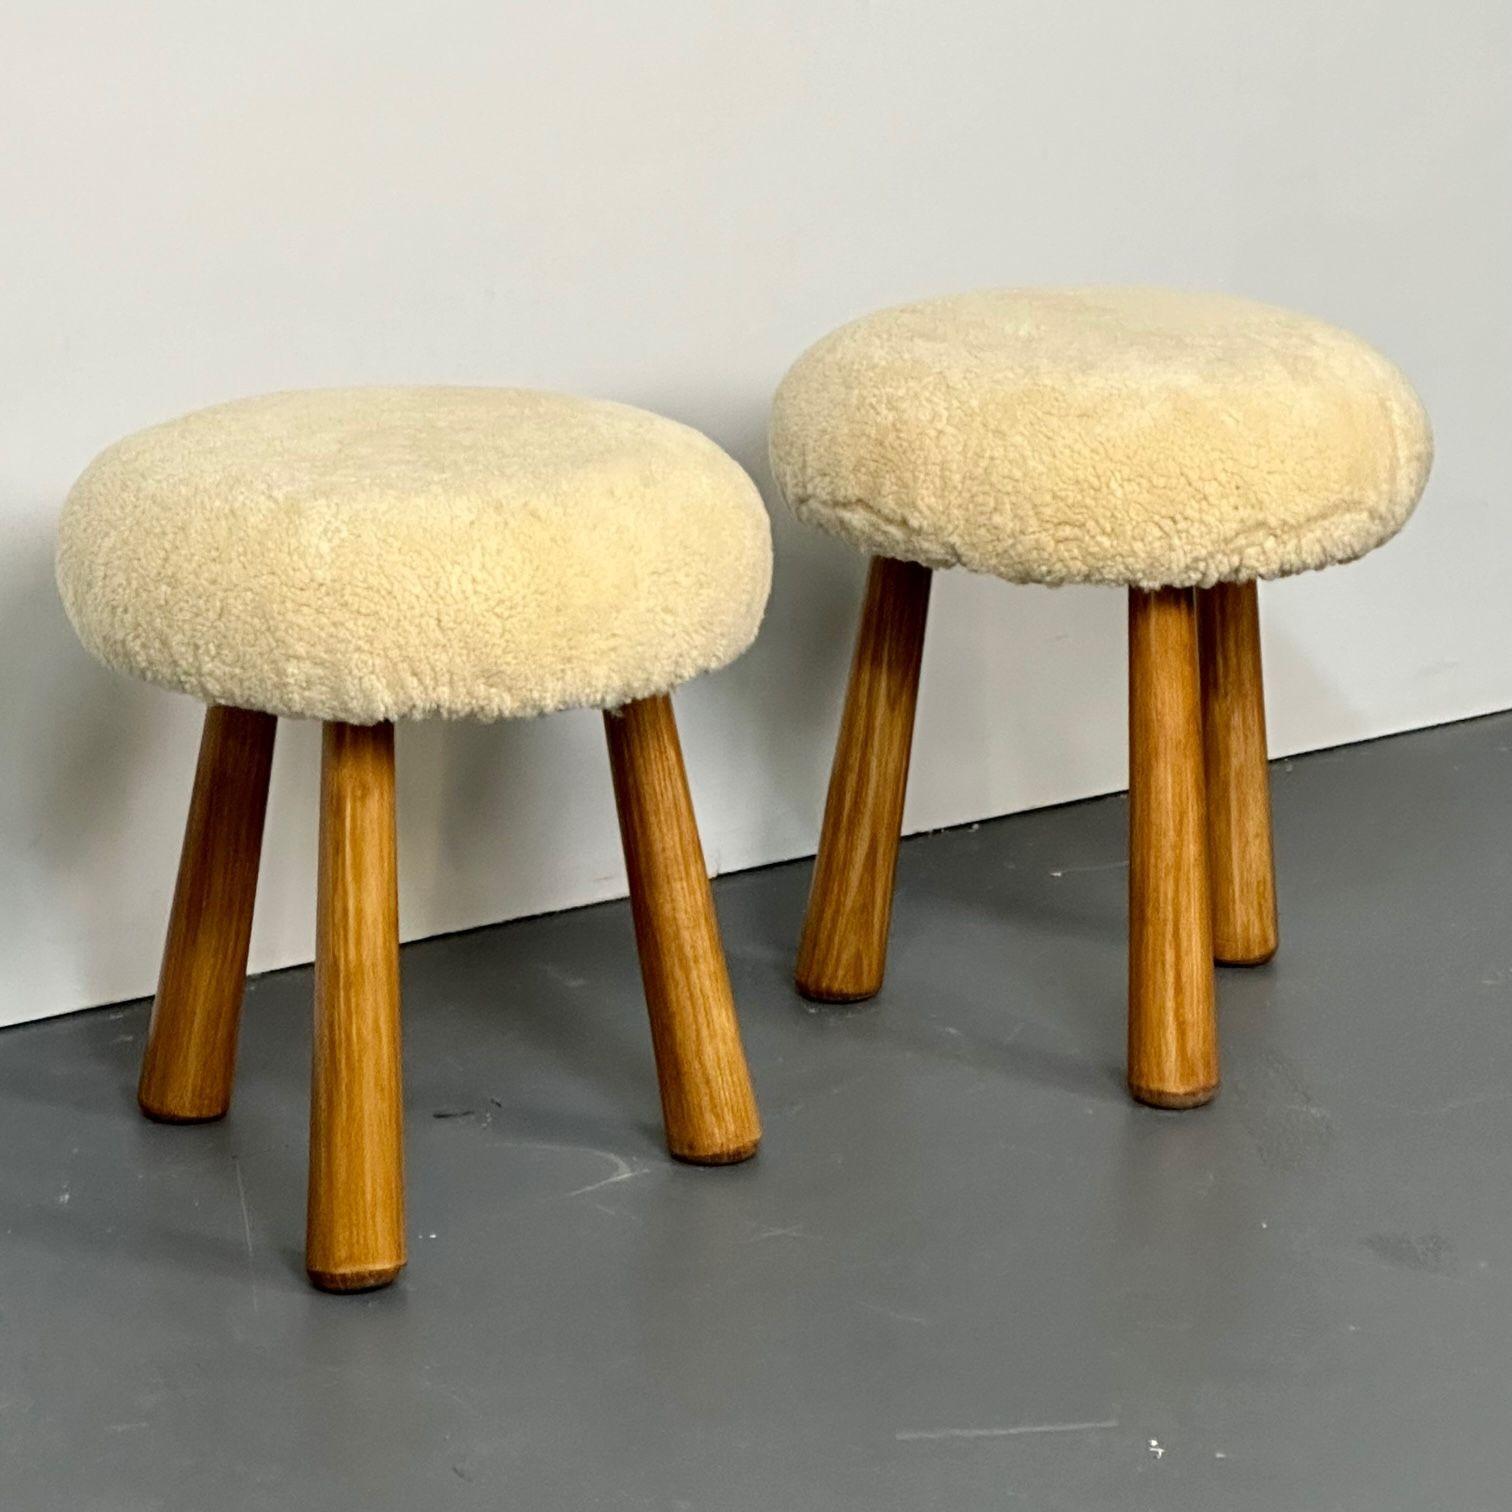 Pair of contemporary Scandinavian modern style beige sheepskin stools / ottomans
Contemporary organic form tri-pod stools or ottomans. New memory foam cushioning and genuine shearling. Can mix and match beige or honey sheepskin color stools. The